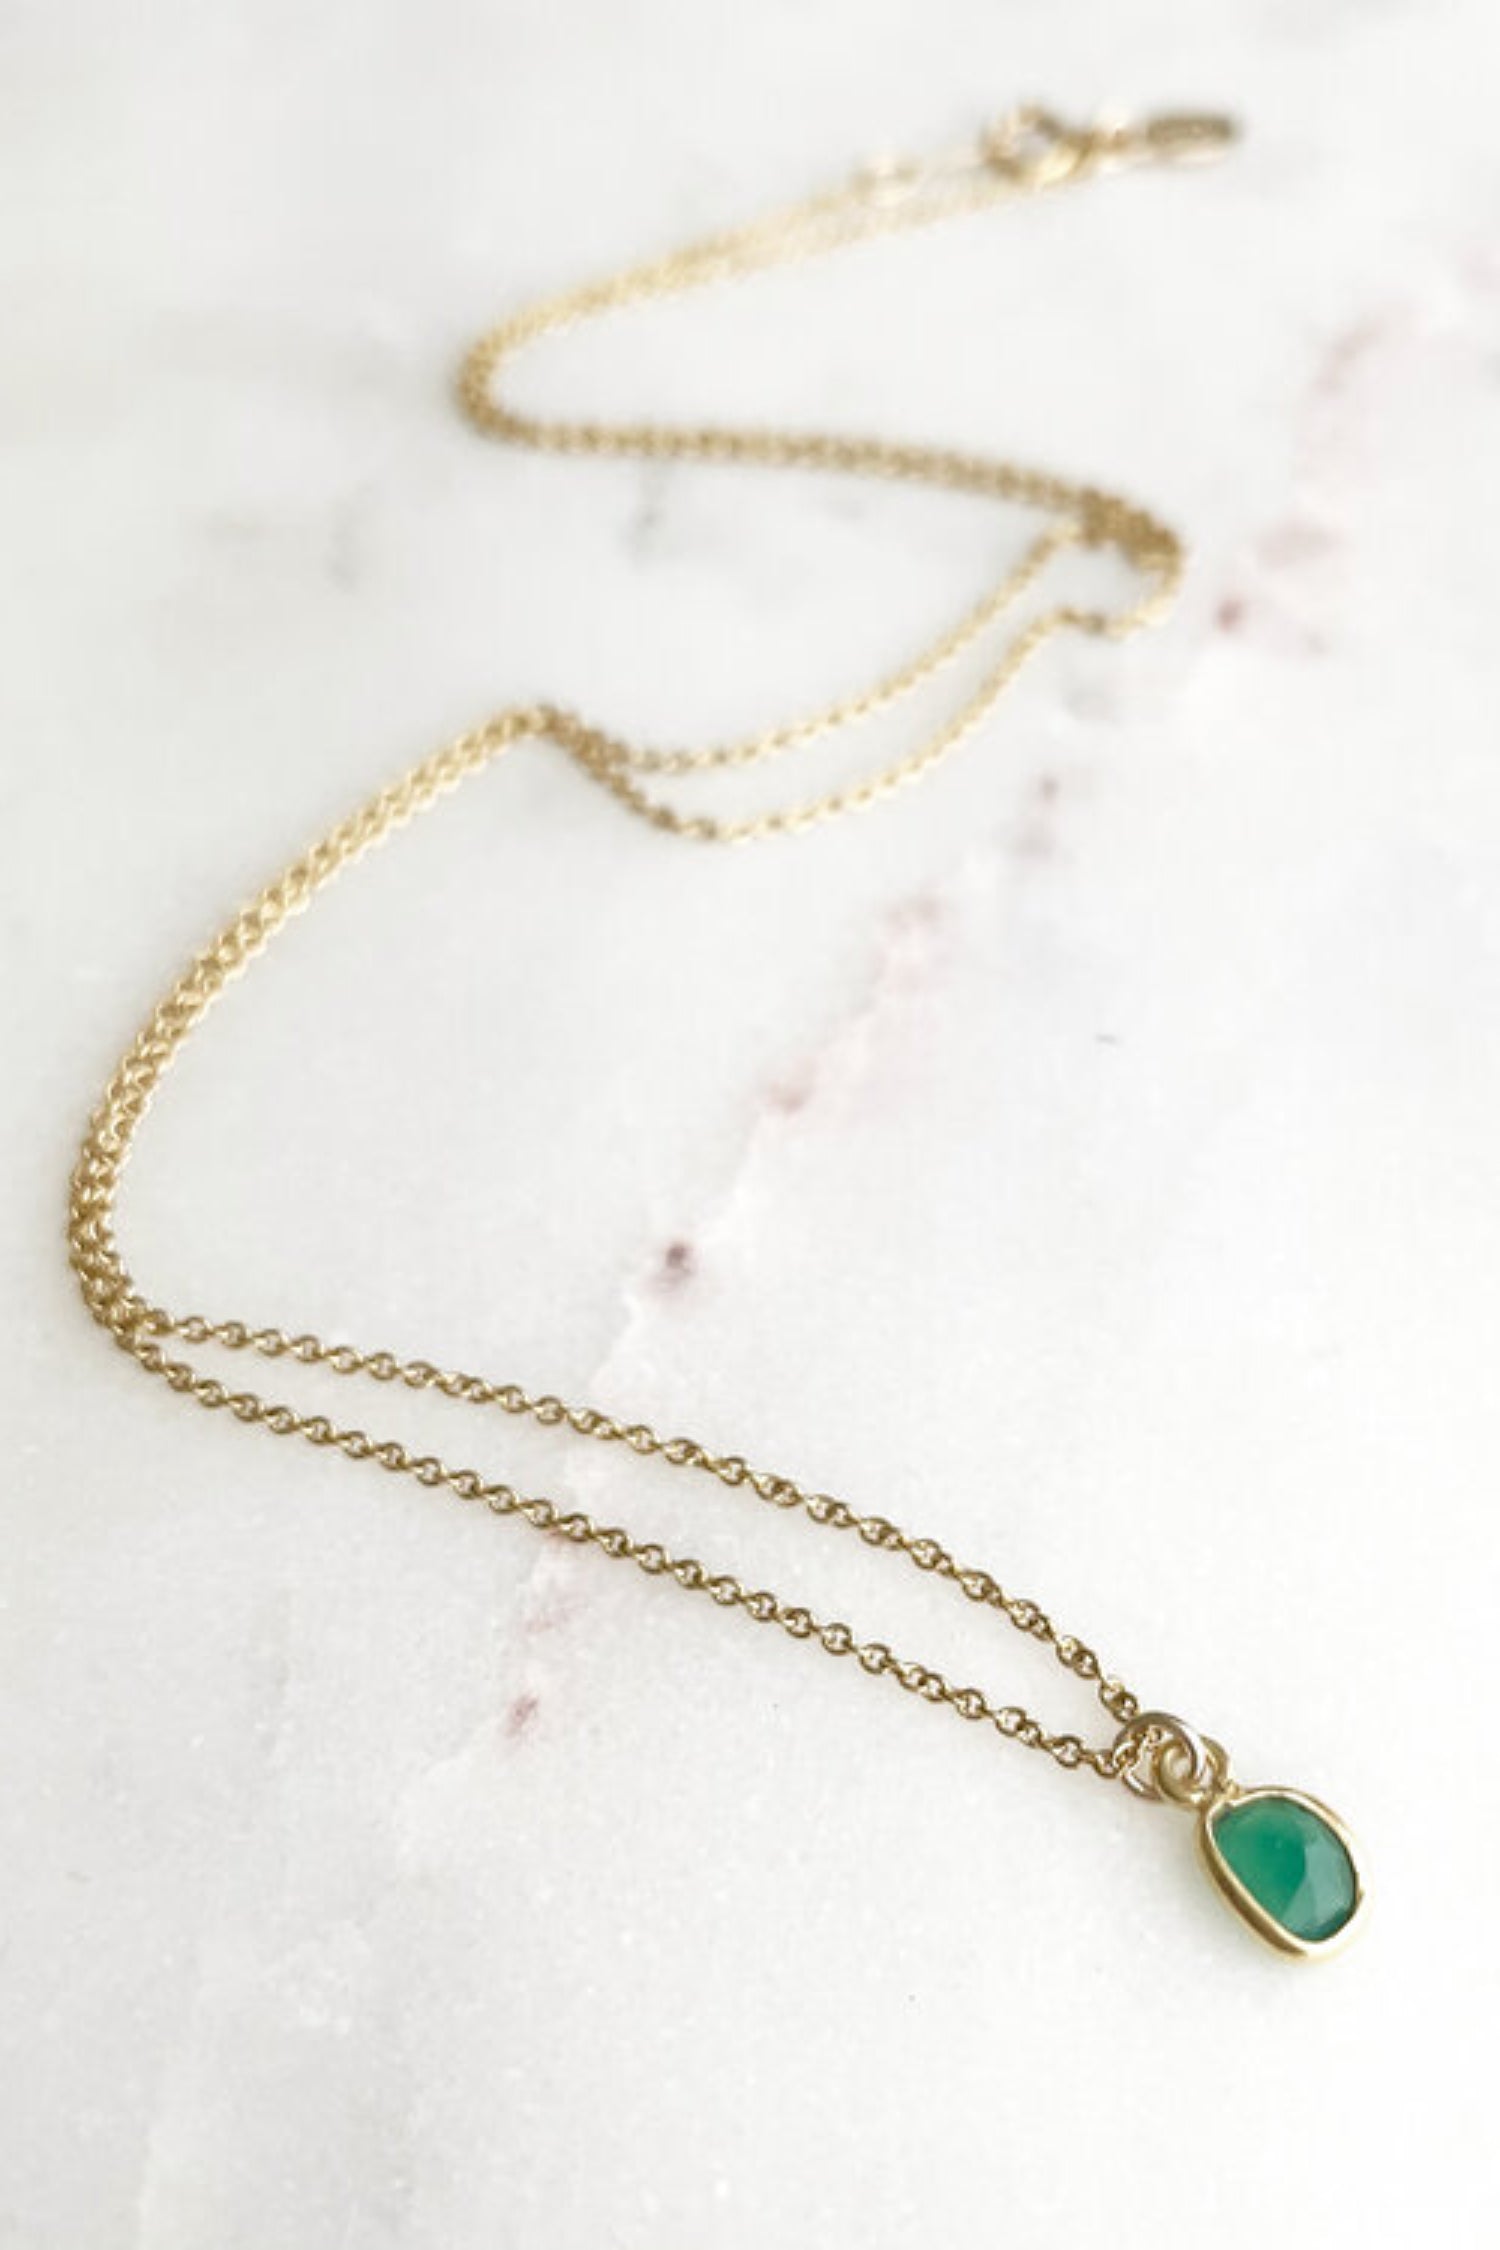 Mini Gem Necklace by Katye Landry, Emerald, gold vermeil, 14k goldfill round cable chain, made in Ottawa